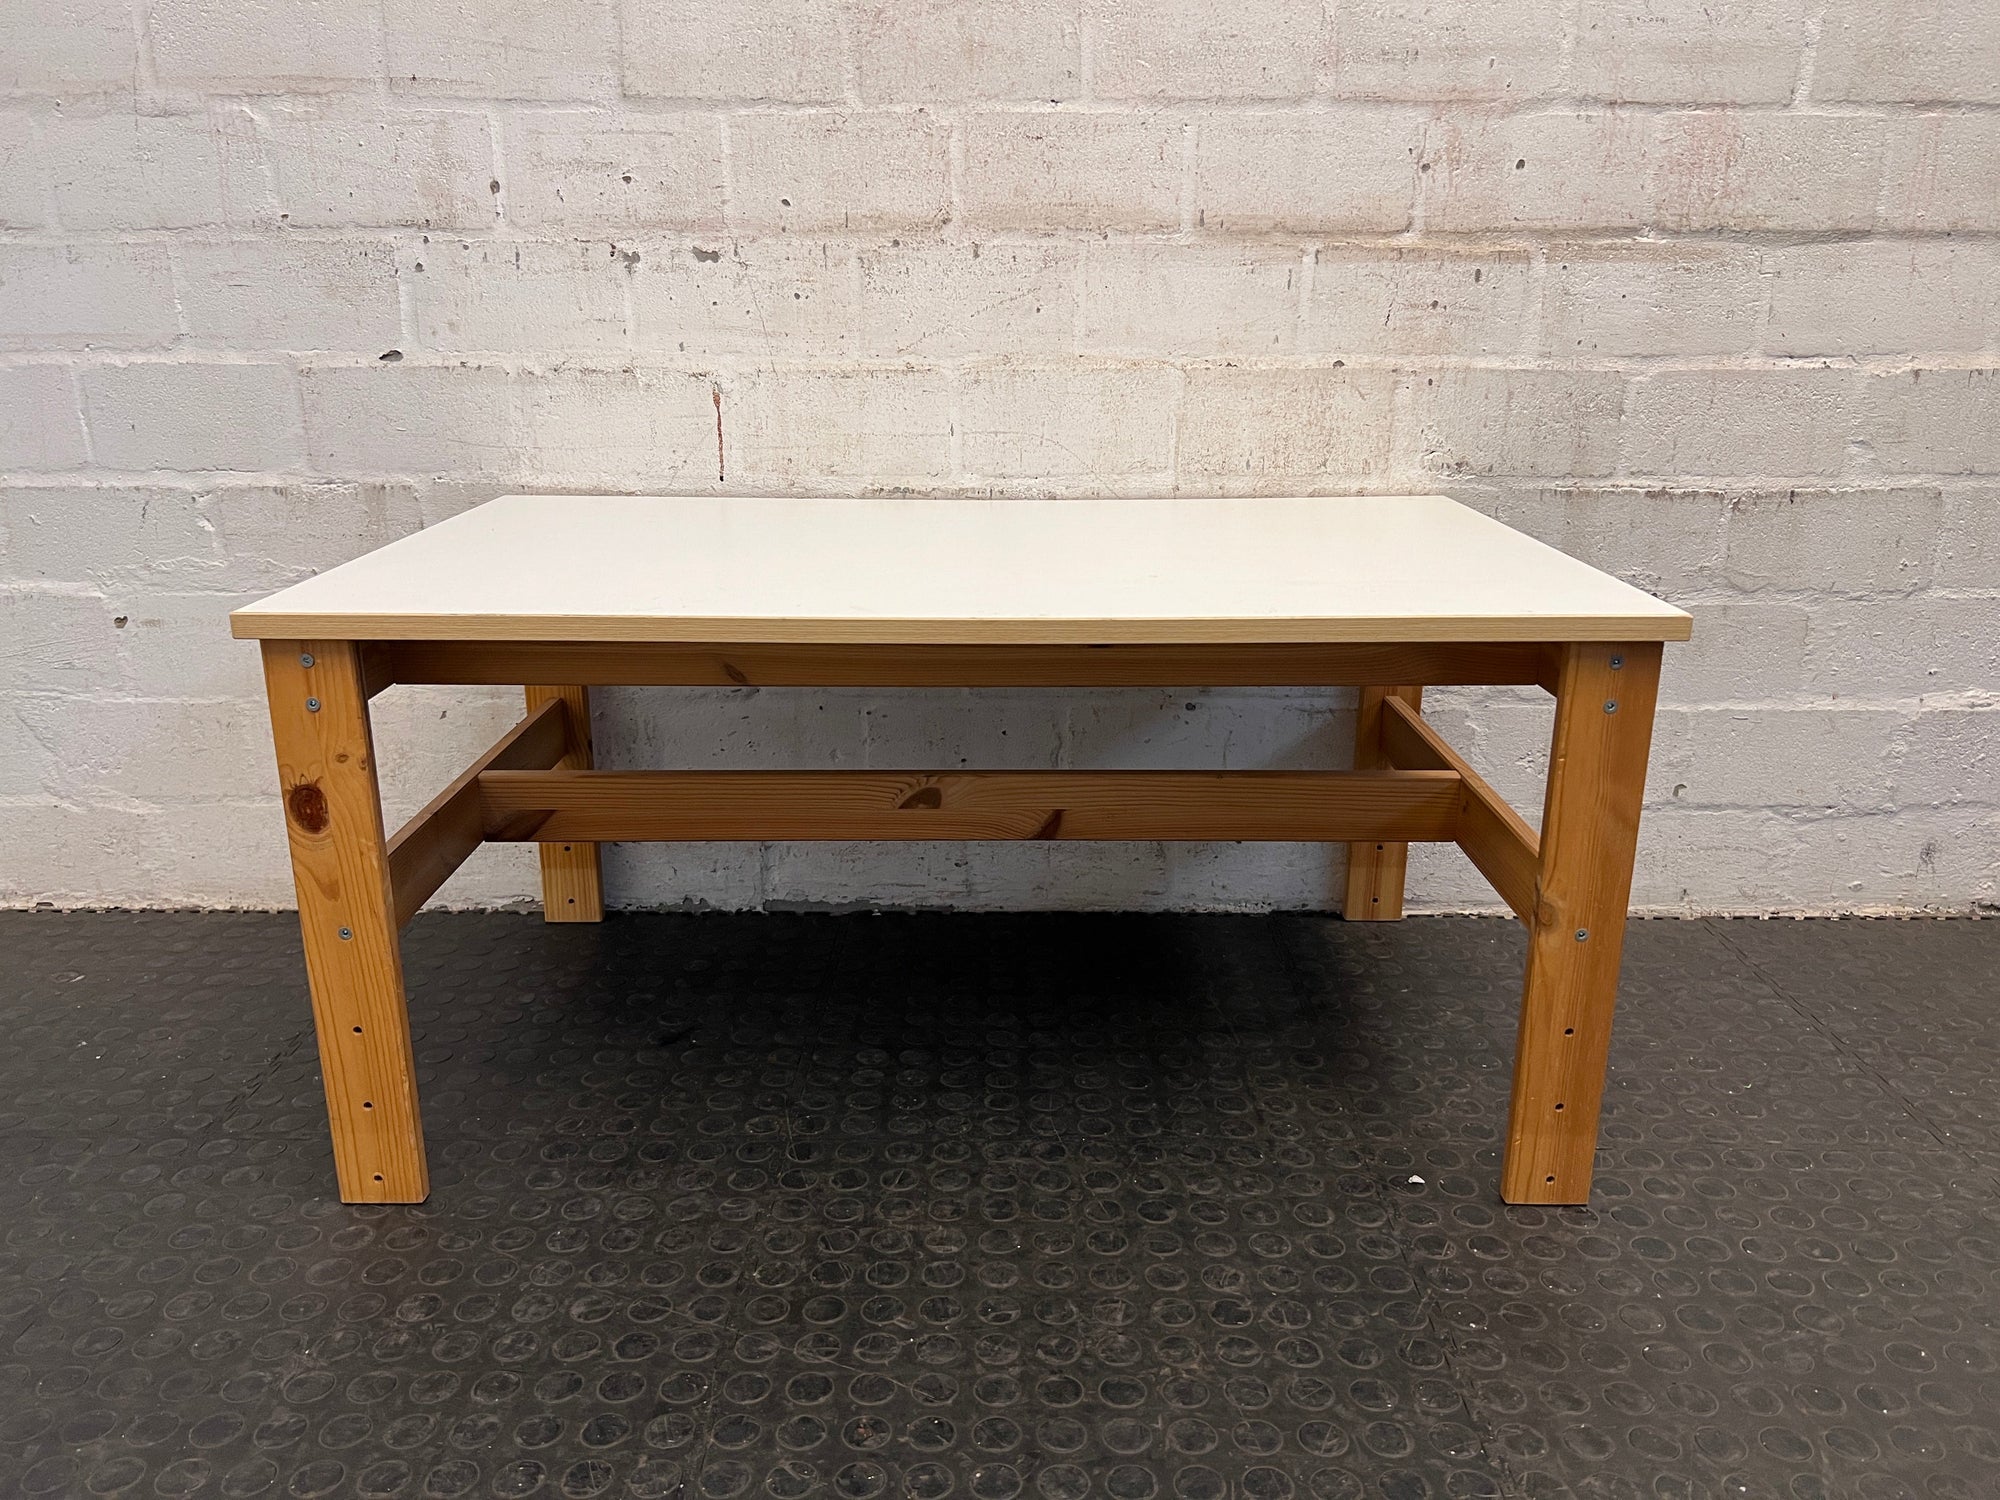 Small Wooden Kids Table with White Surface (101cm x 48cm)